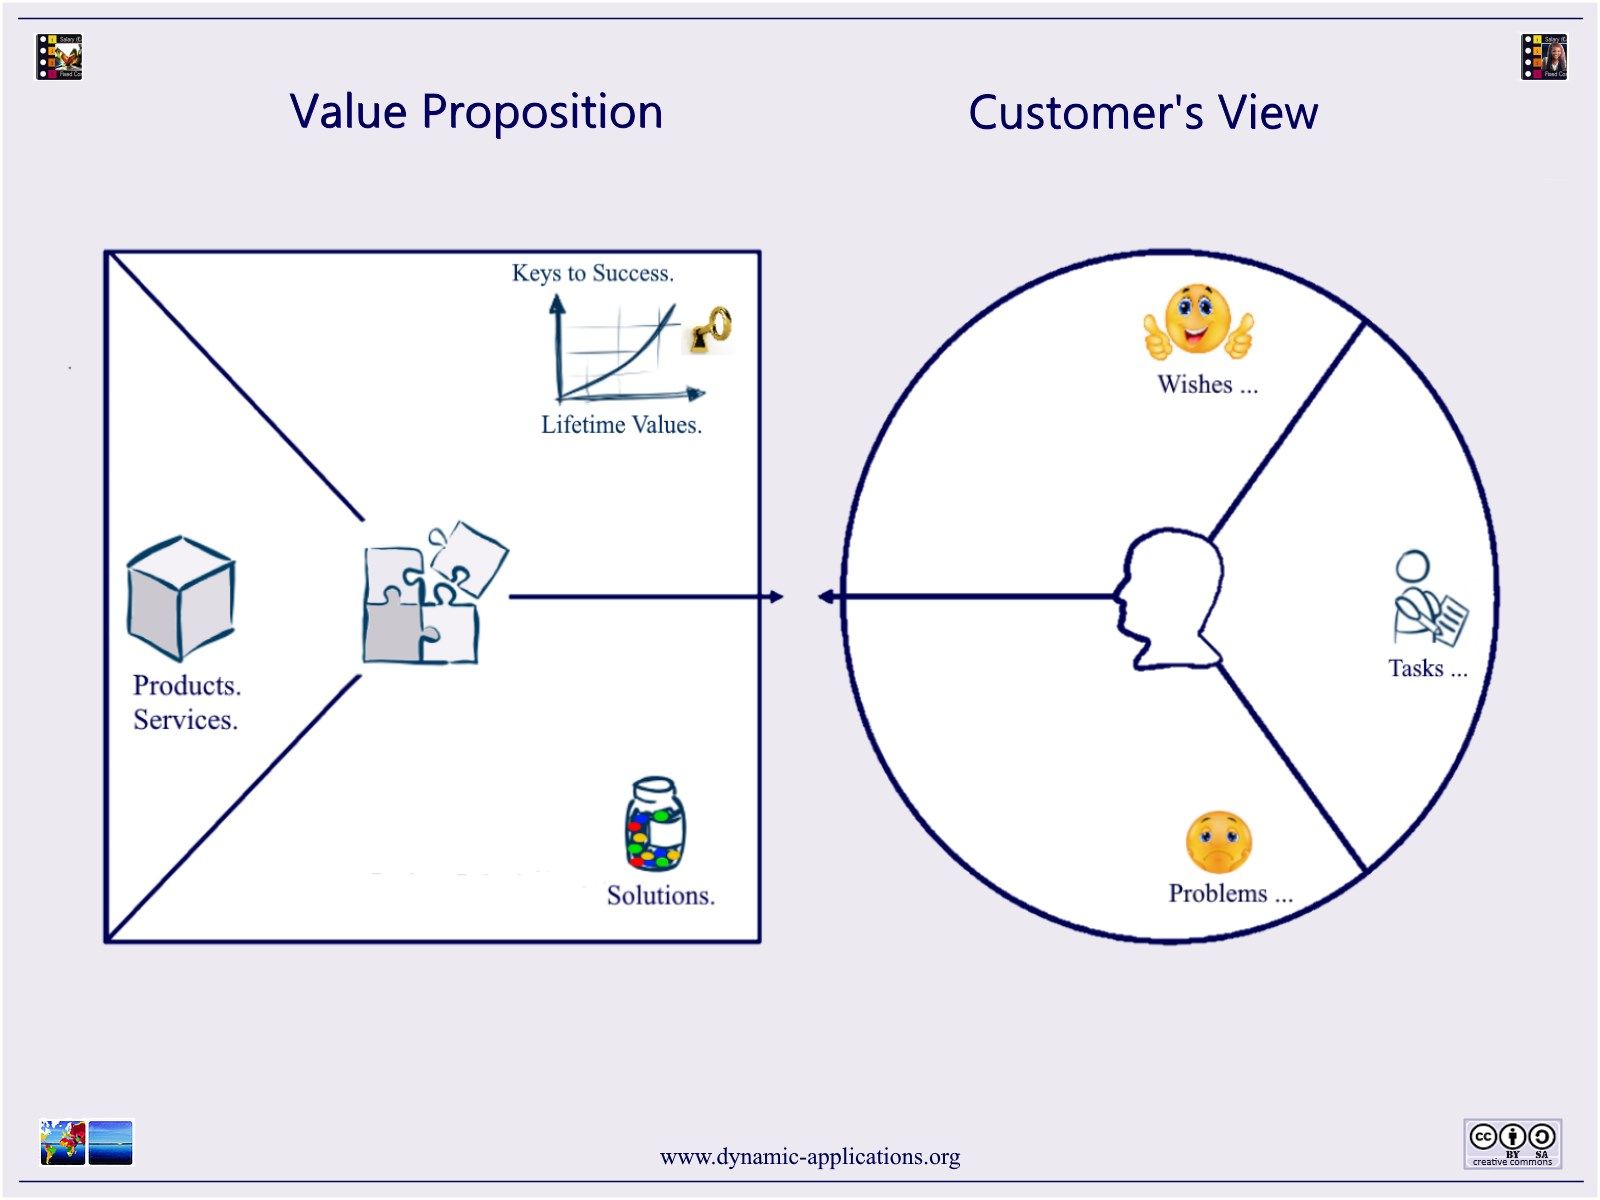 Value Proposition Canvas - determine your Product and Service cost